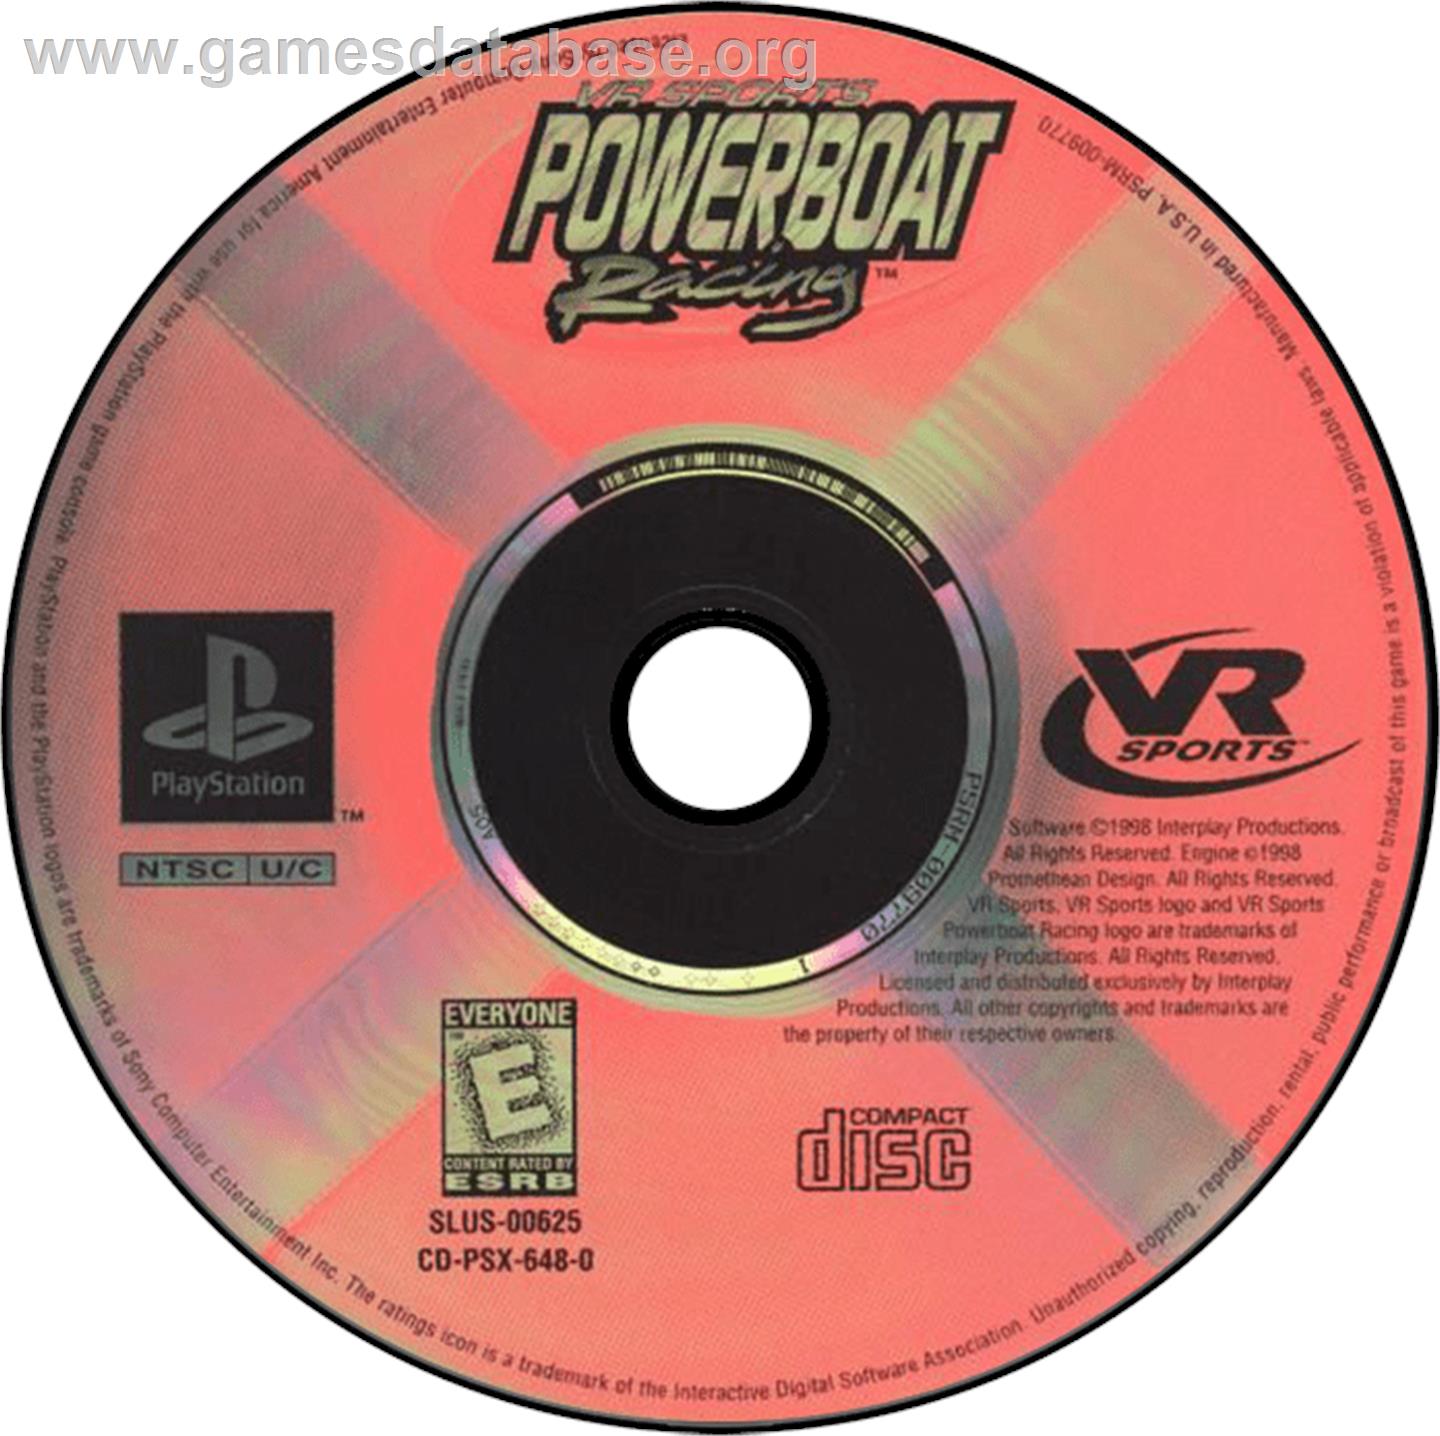 VR Sports Powerboat Racing - Sony Playstation - Artwork - Disc